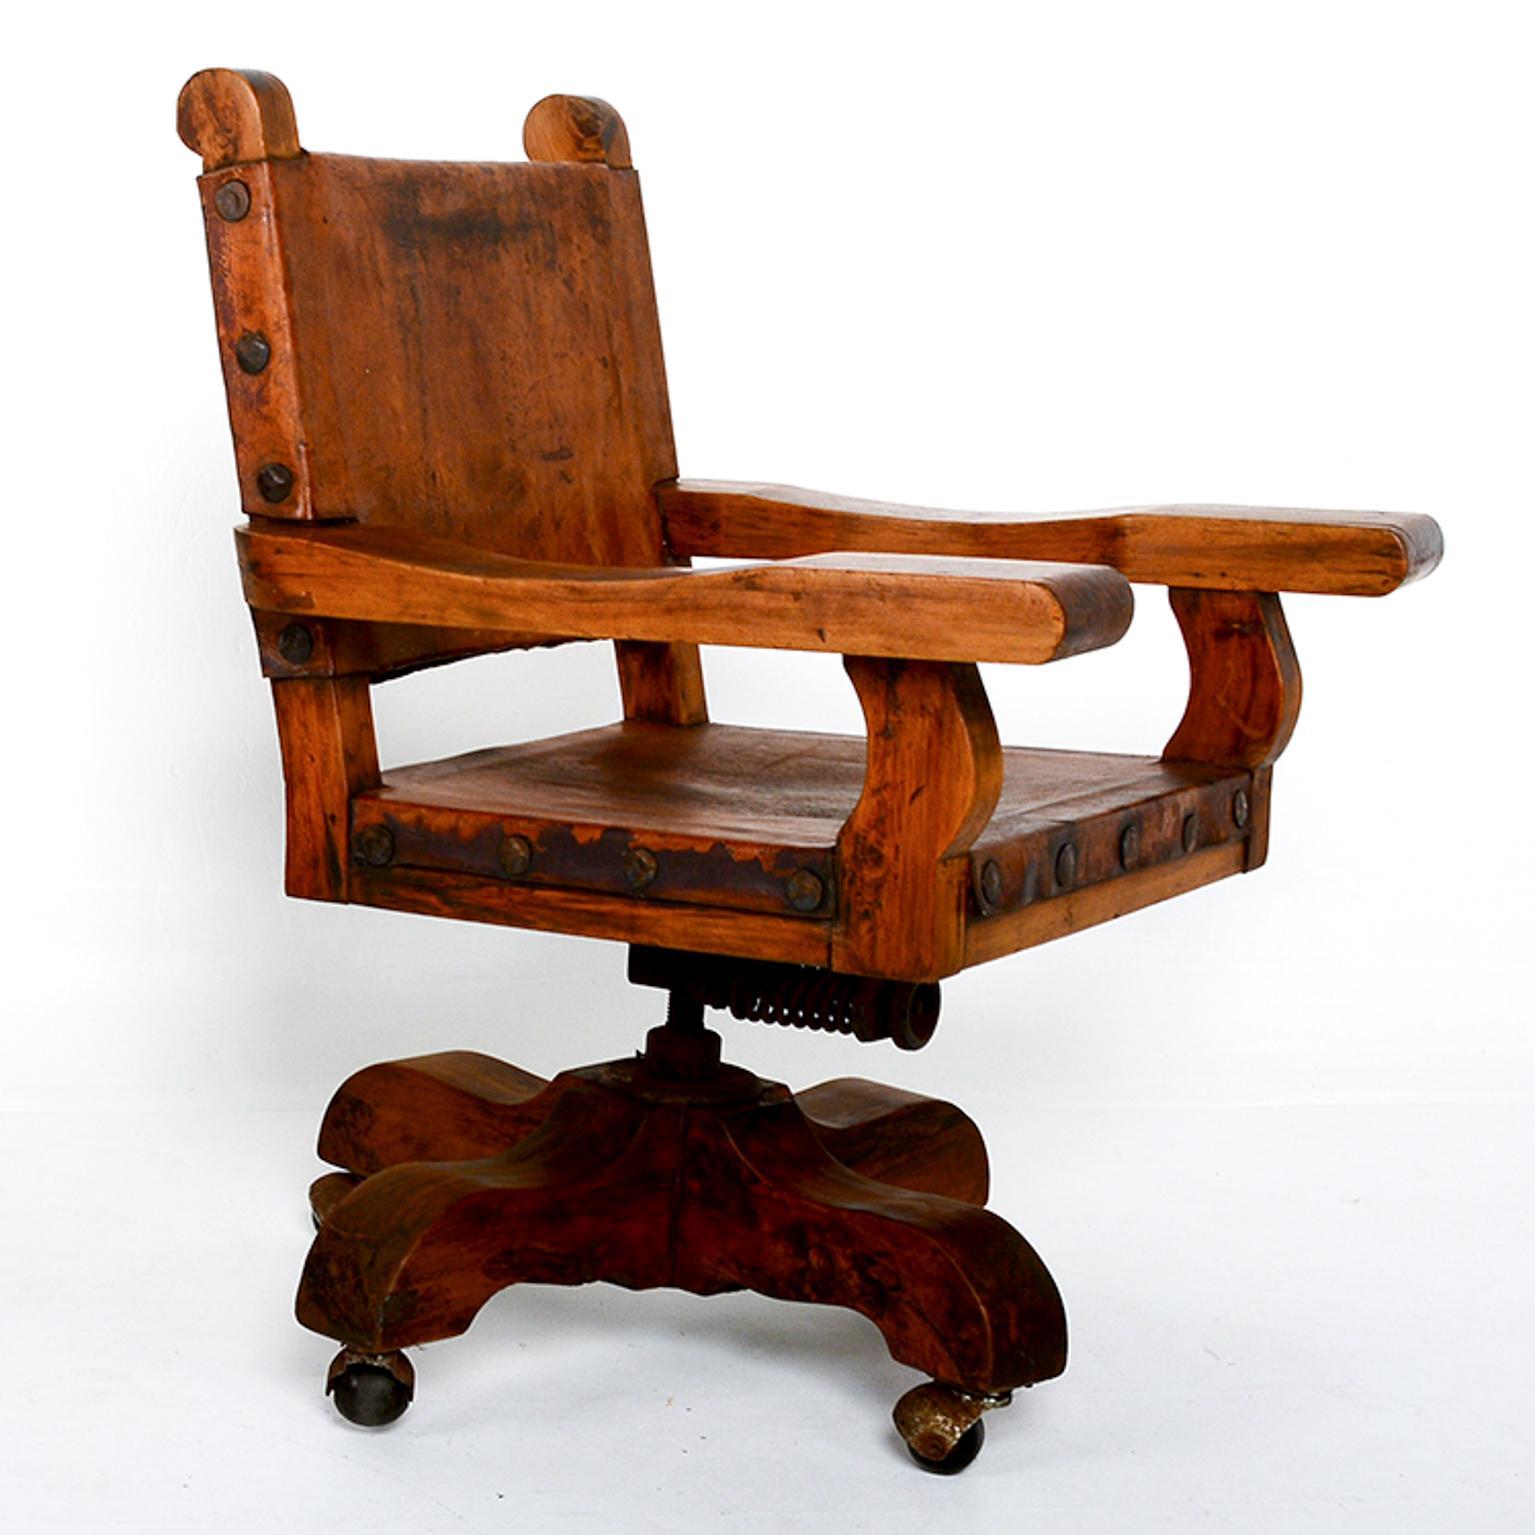 Mid-20th Century Spanish Colonial Mexican Mahogany Leather Office Rolling Chair Francisco Artigas